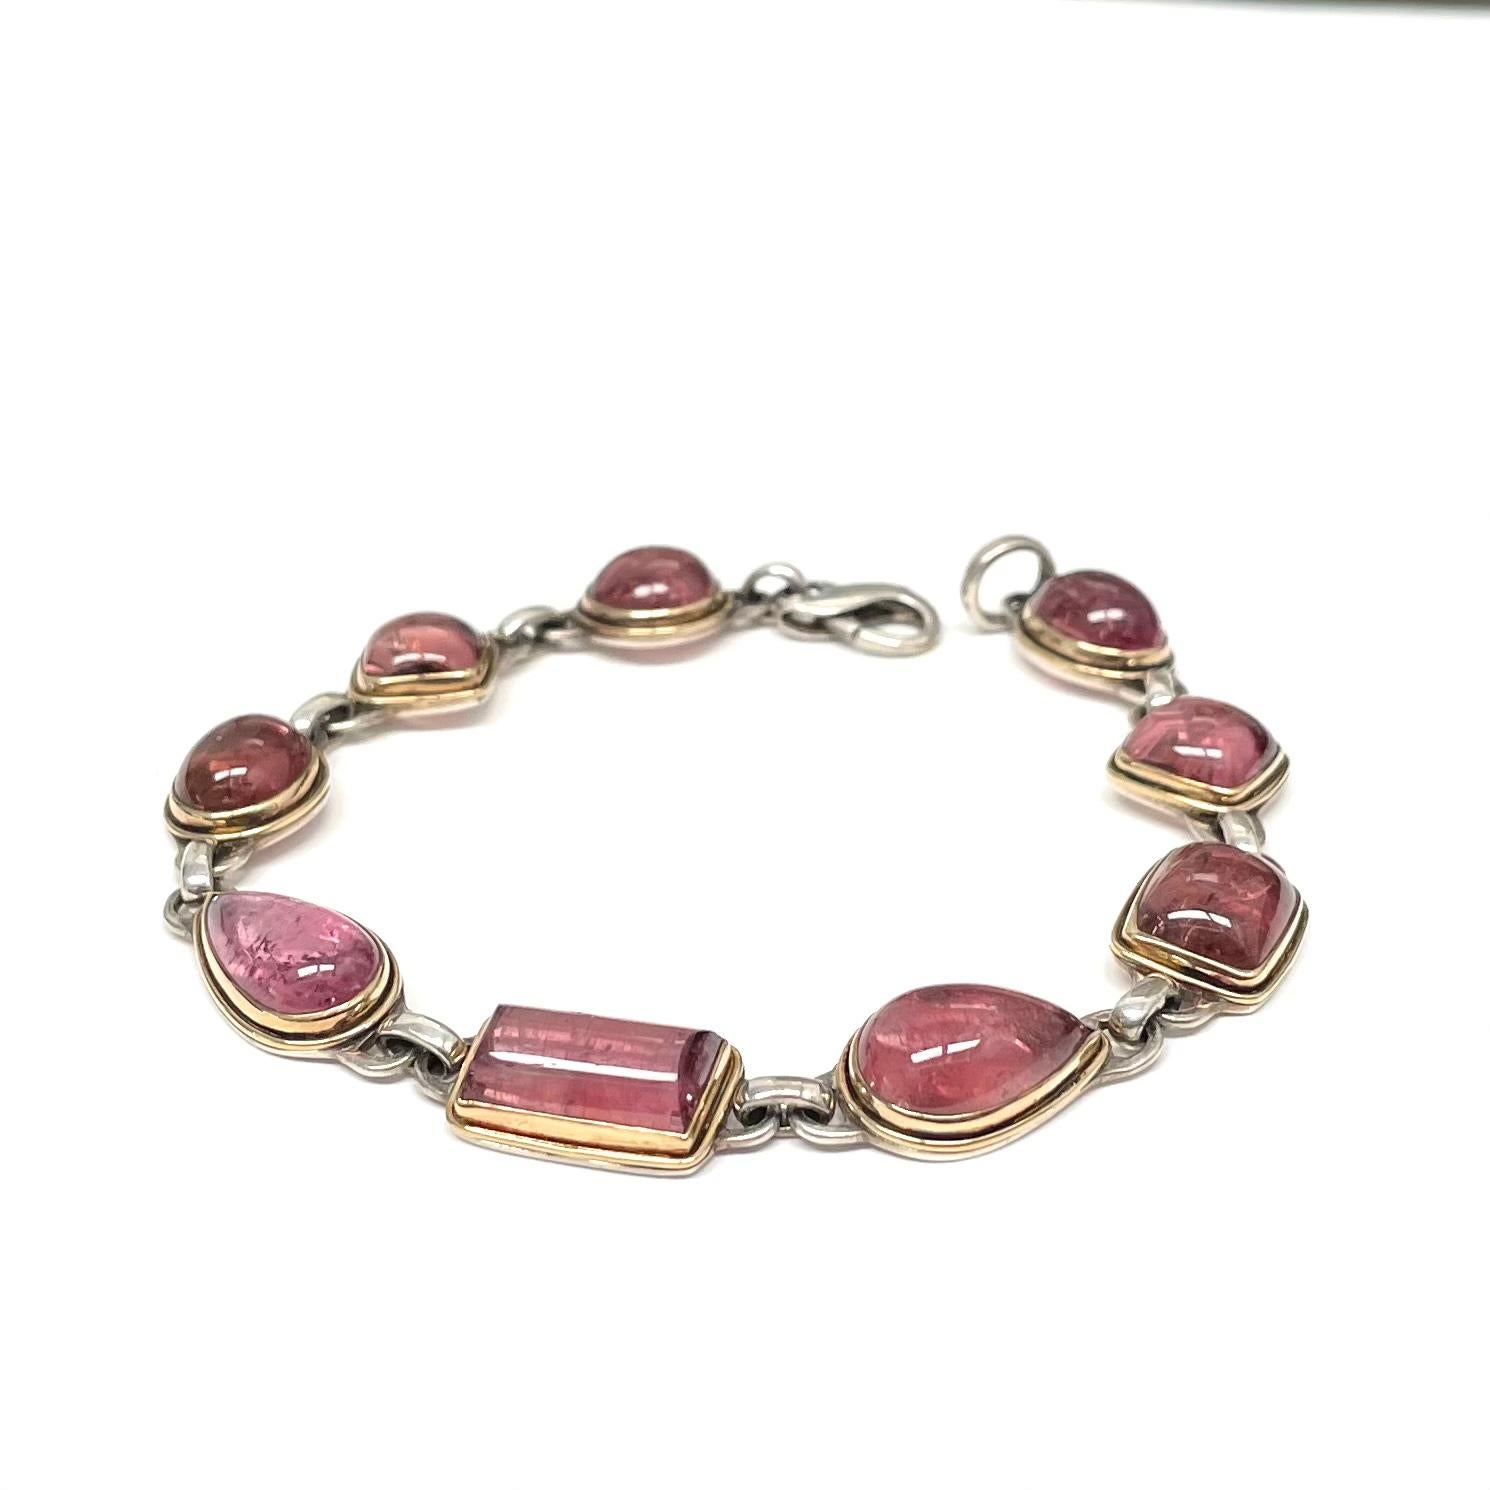 Nine variable shaped approximately 7 x 10 to 9 x 12 mm Mozambique pink tourmaline cabochons are set in 18K gold bezels with surrounding 18K gold wire accents atop sterling silver bases and links in this organic Steven Battelle design.  7.5 inch